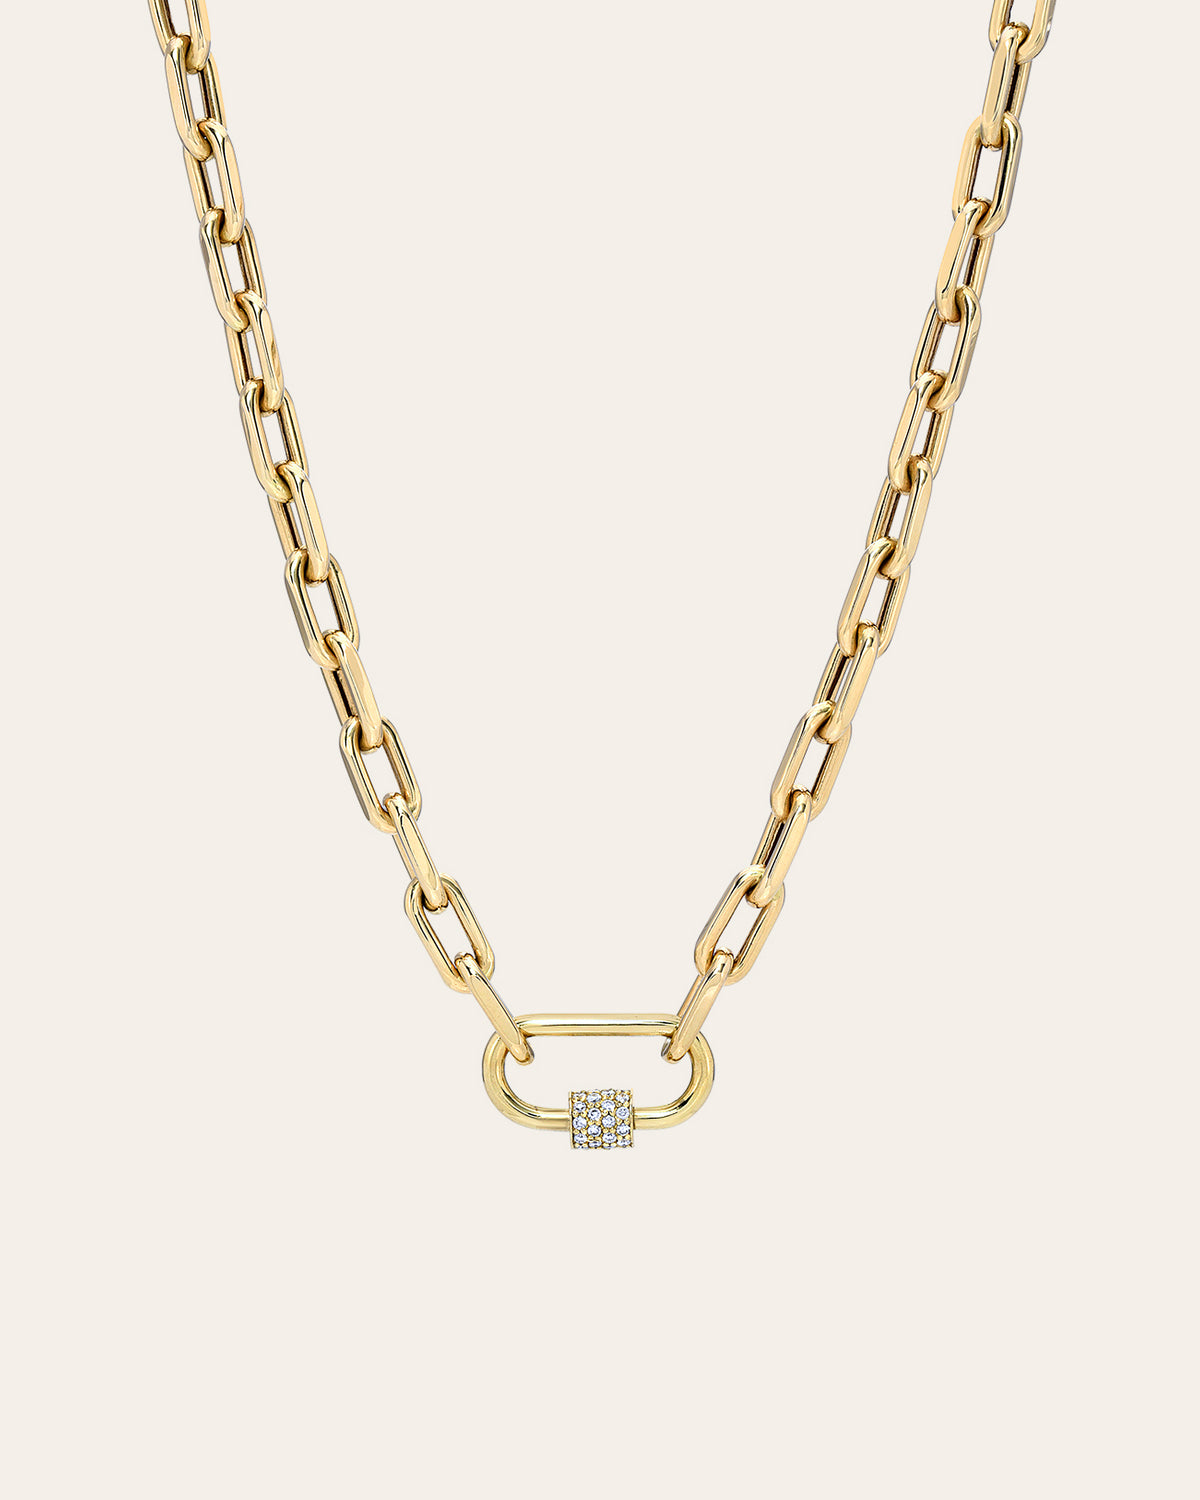 14k Gold Large Open Link Chain with Diamond Carabiner Necklace